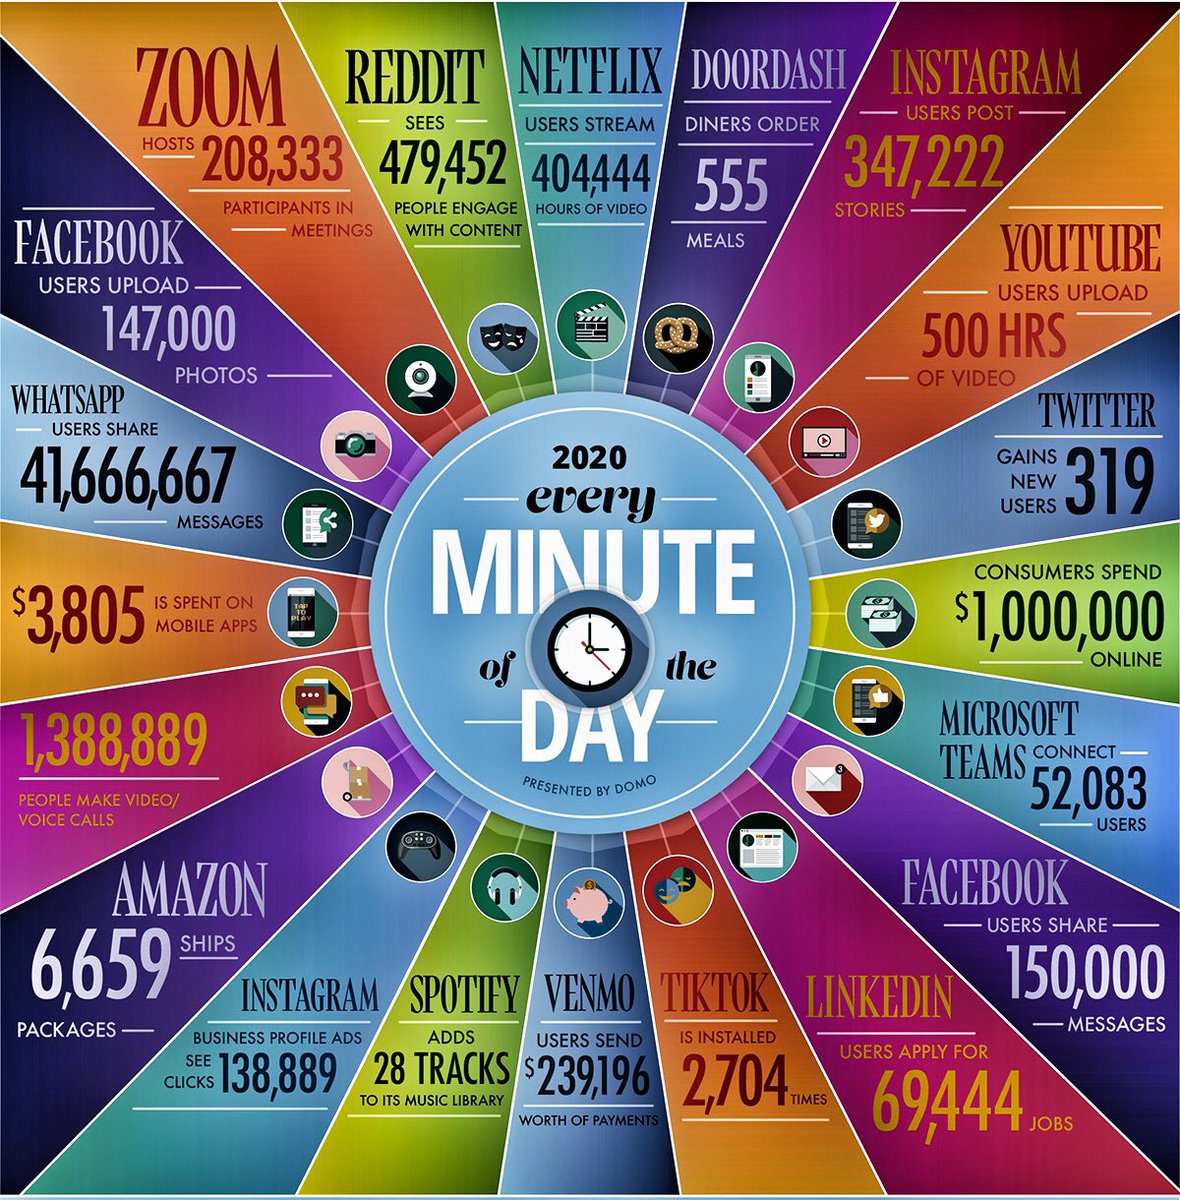 2020 - Every Minute of the Day Online. This infographic shows the human proclivity for connection, consumption, and disconnection from reality; all accelerated by the pandemic #abed #edchat